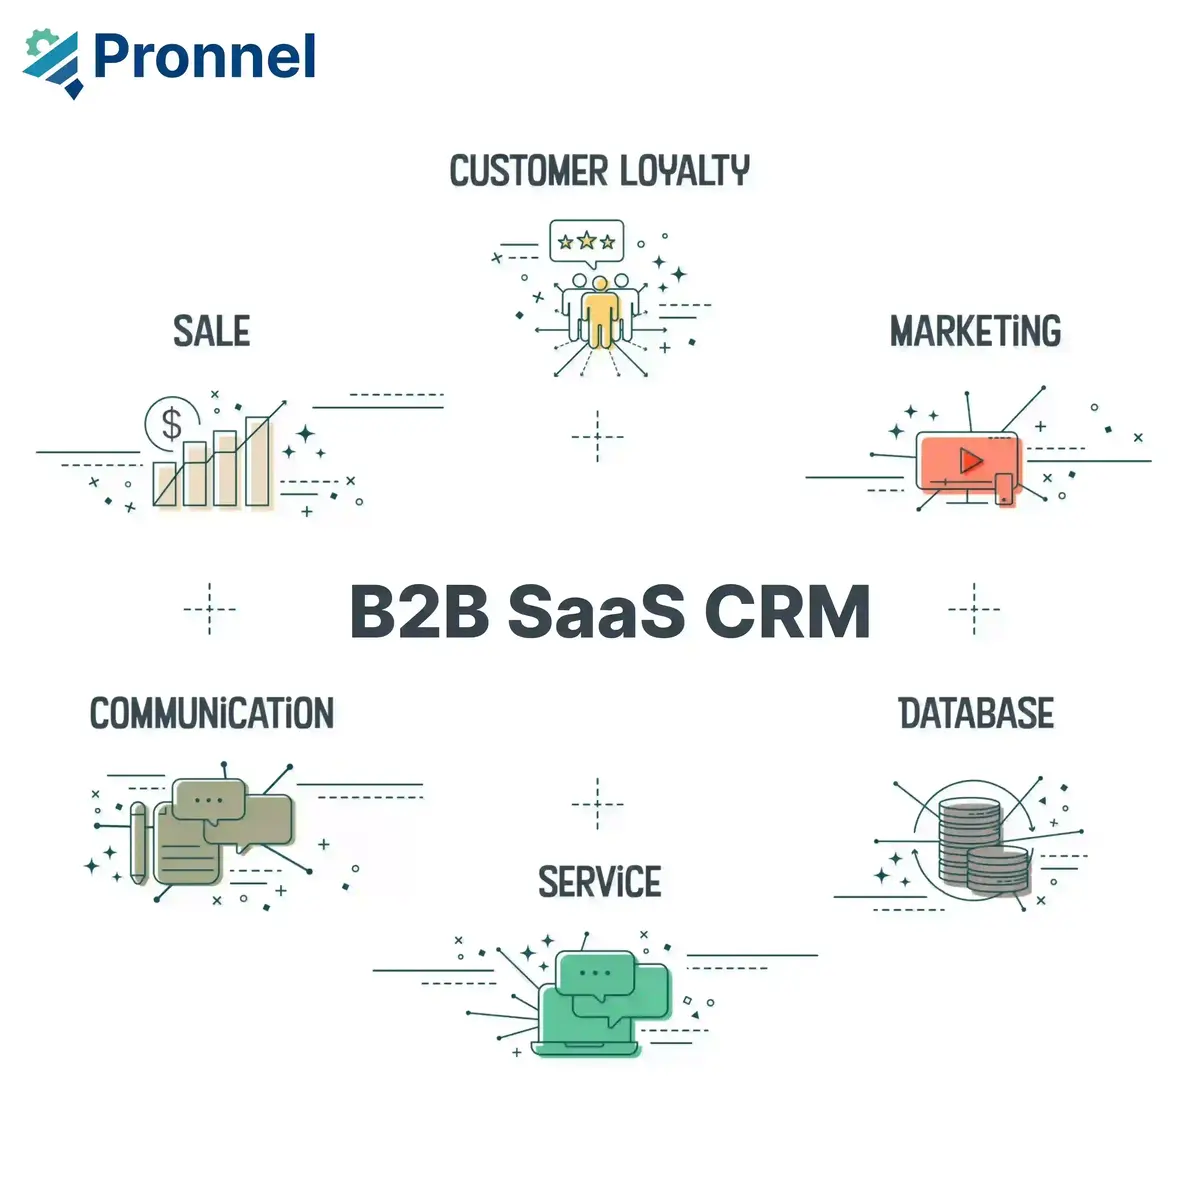 B2B SaaS CRM with Lead Management, Sales Funnel, Customer Onboarding, Customer Retention/ Engagement, Complaints Management, Contacts Management and Task Management.